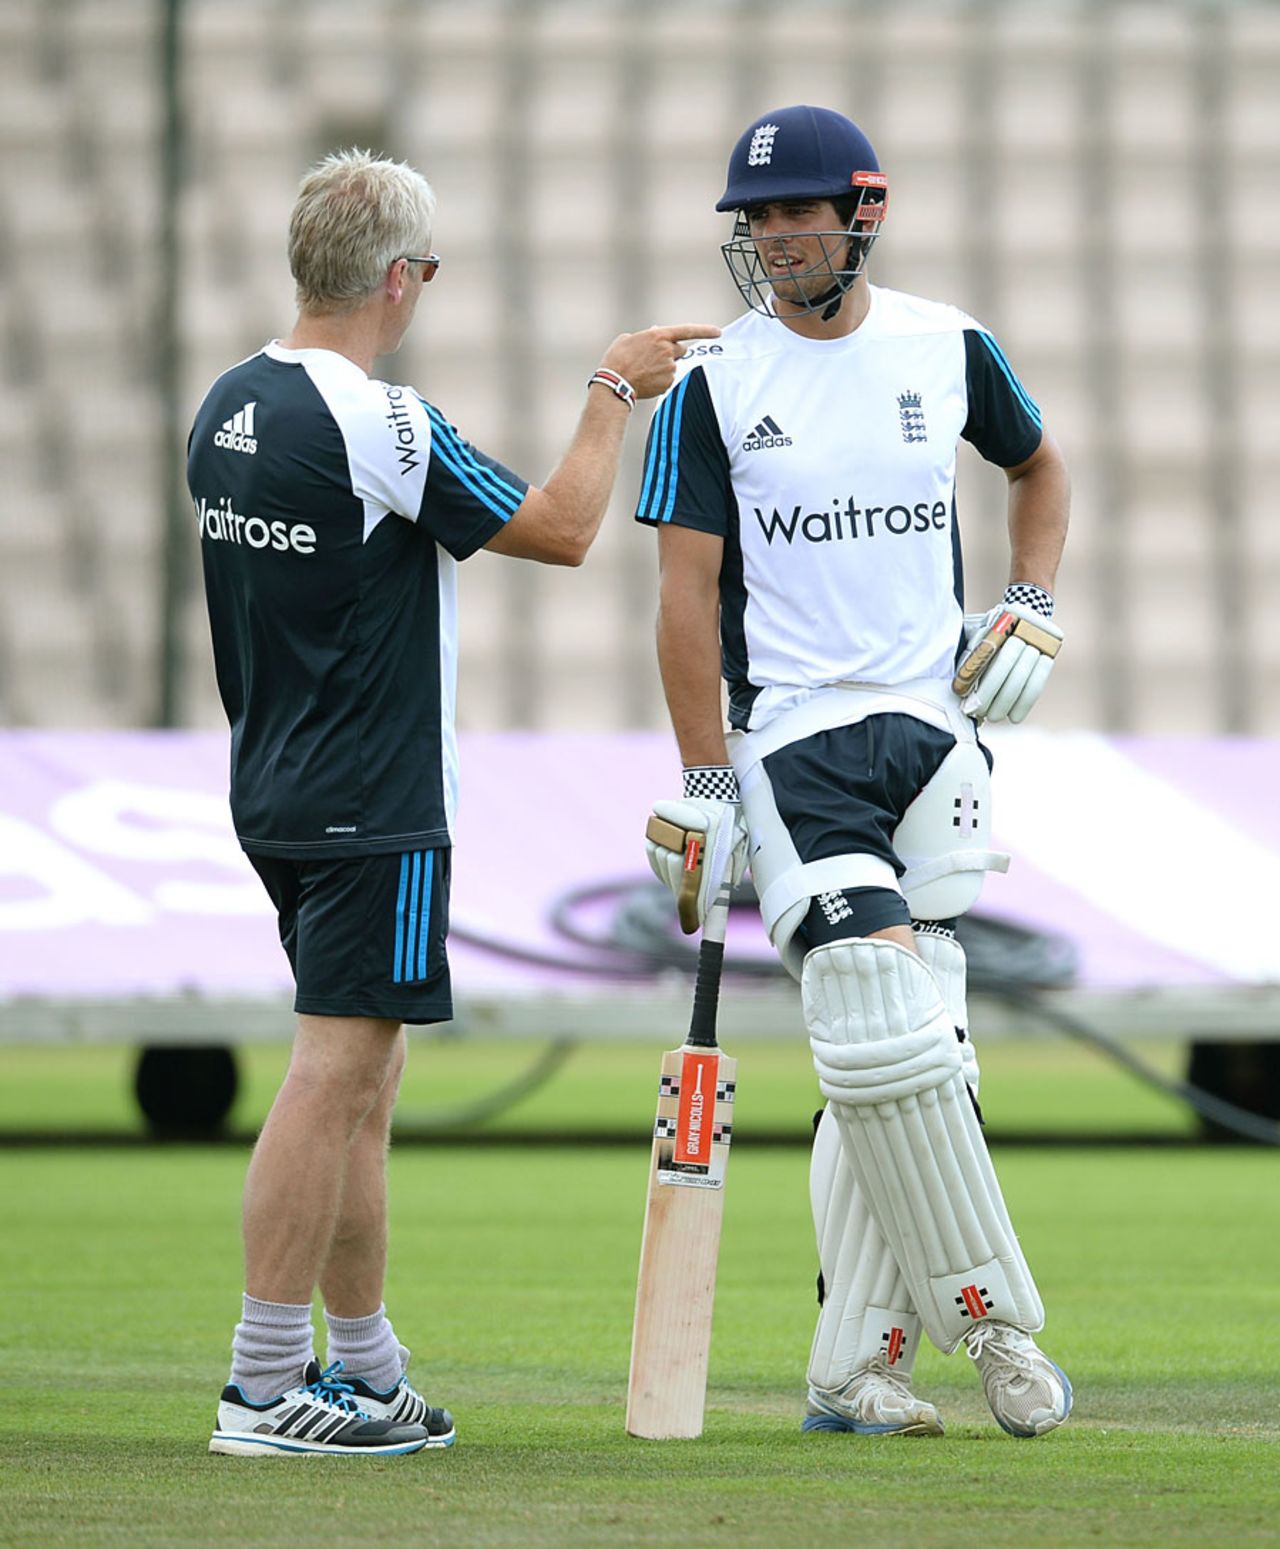 Peter Moores chats with Alastair Cook, Ageas Bowl, July 25, 2014